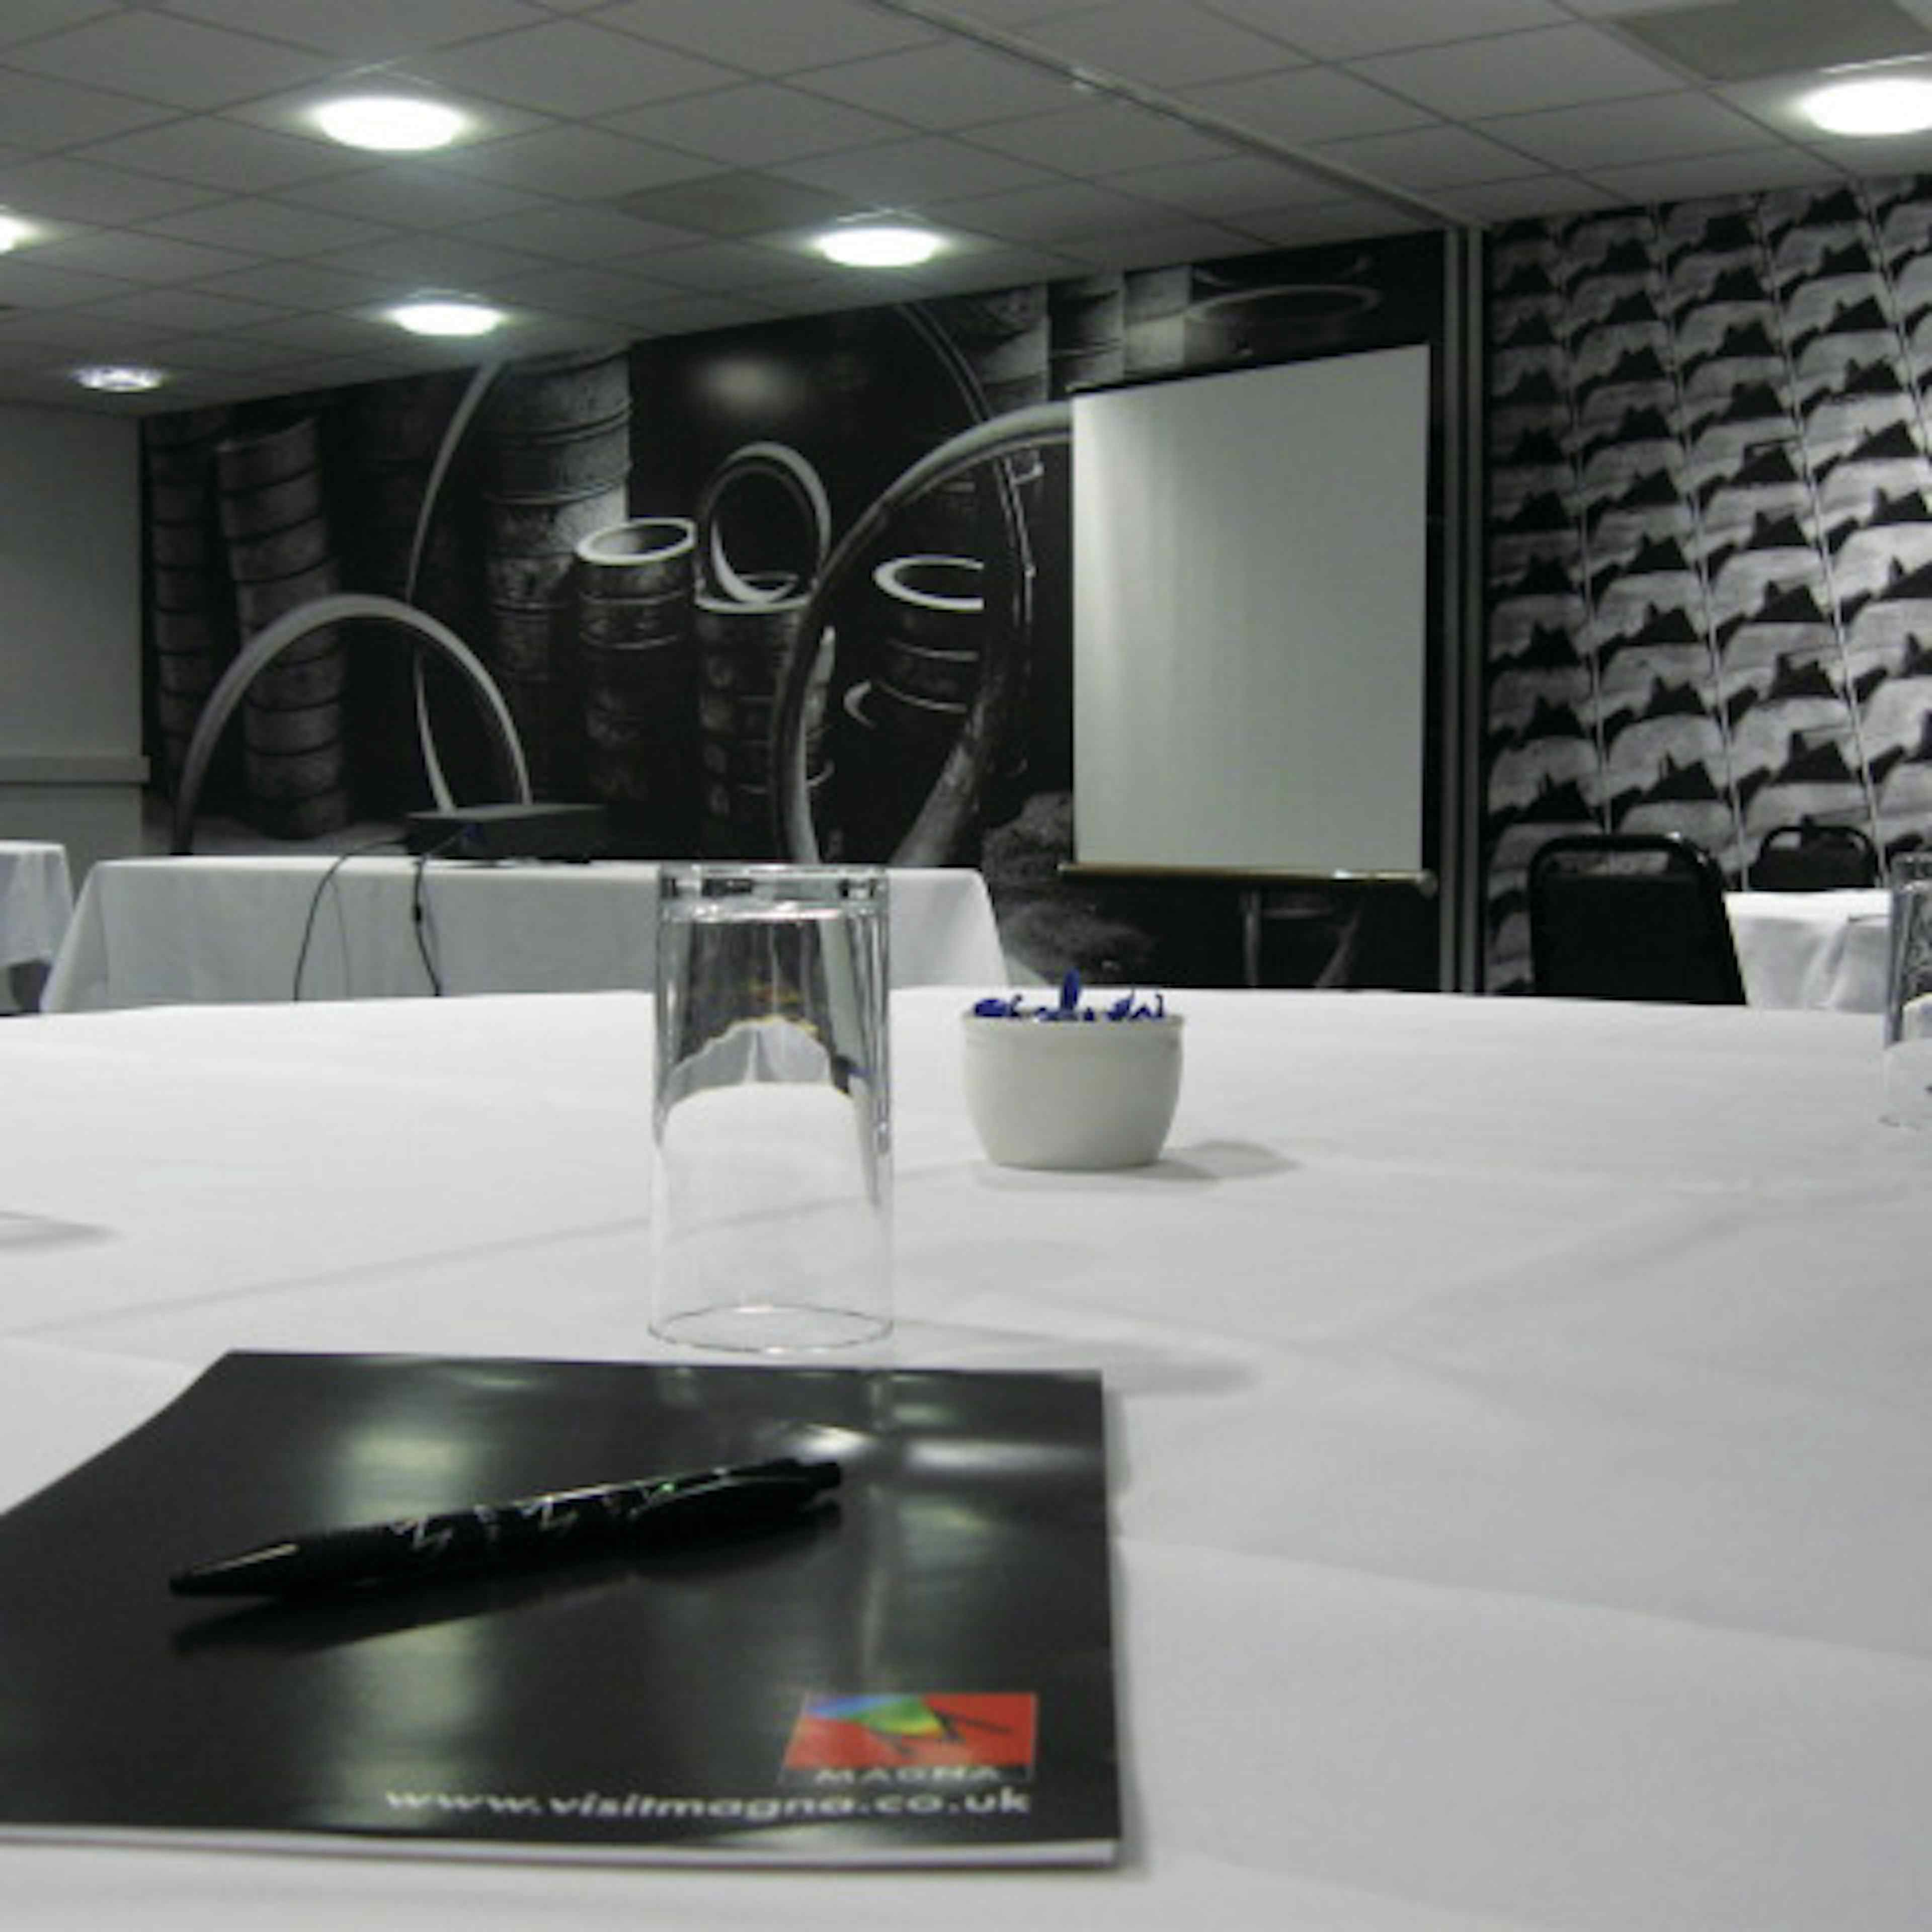 MAGNA  - The Conference Rooms image 3